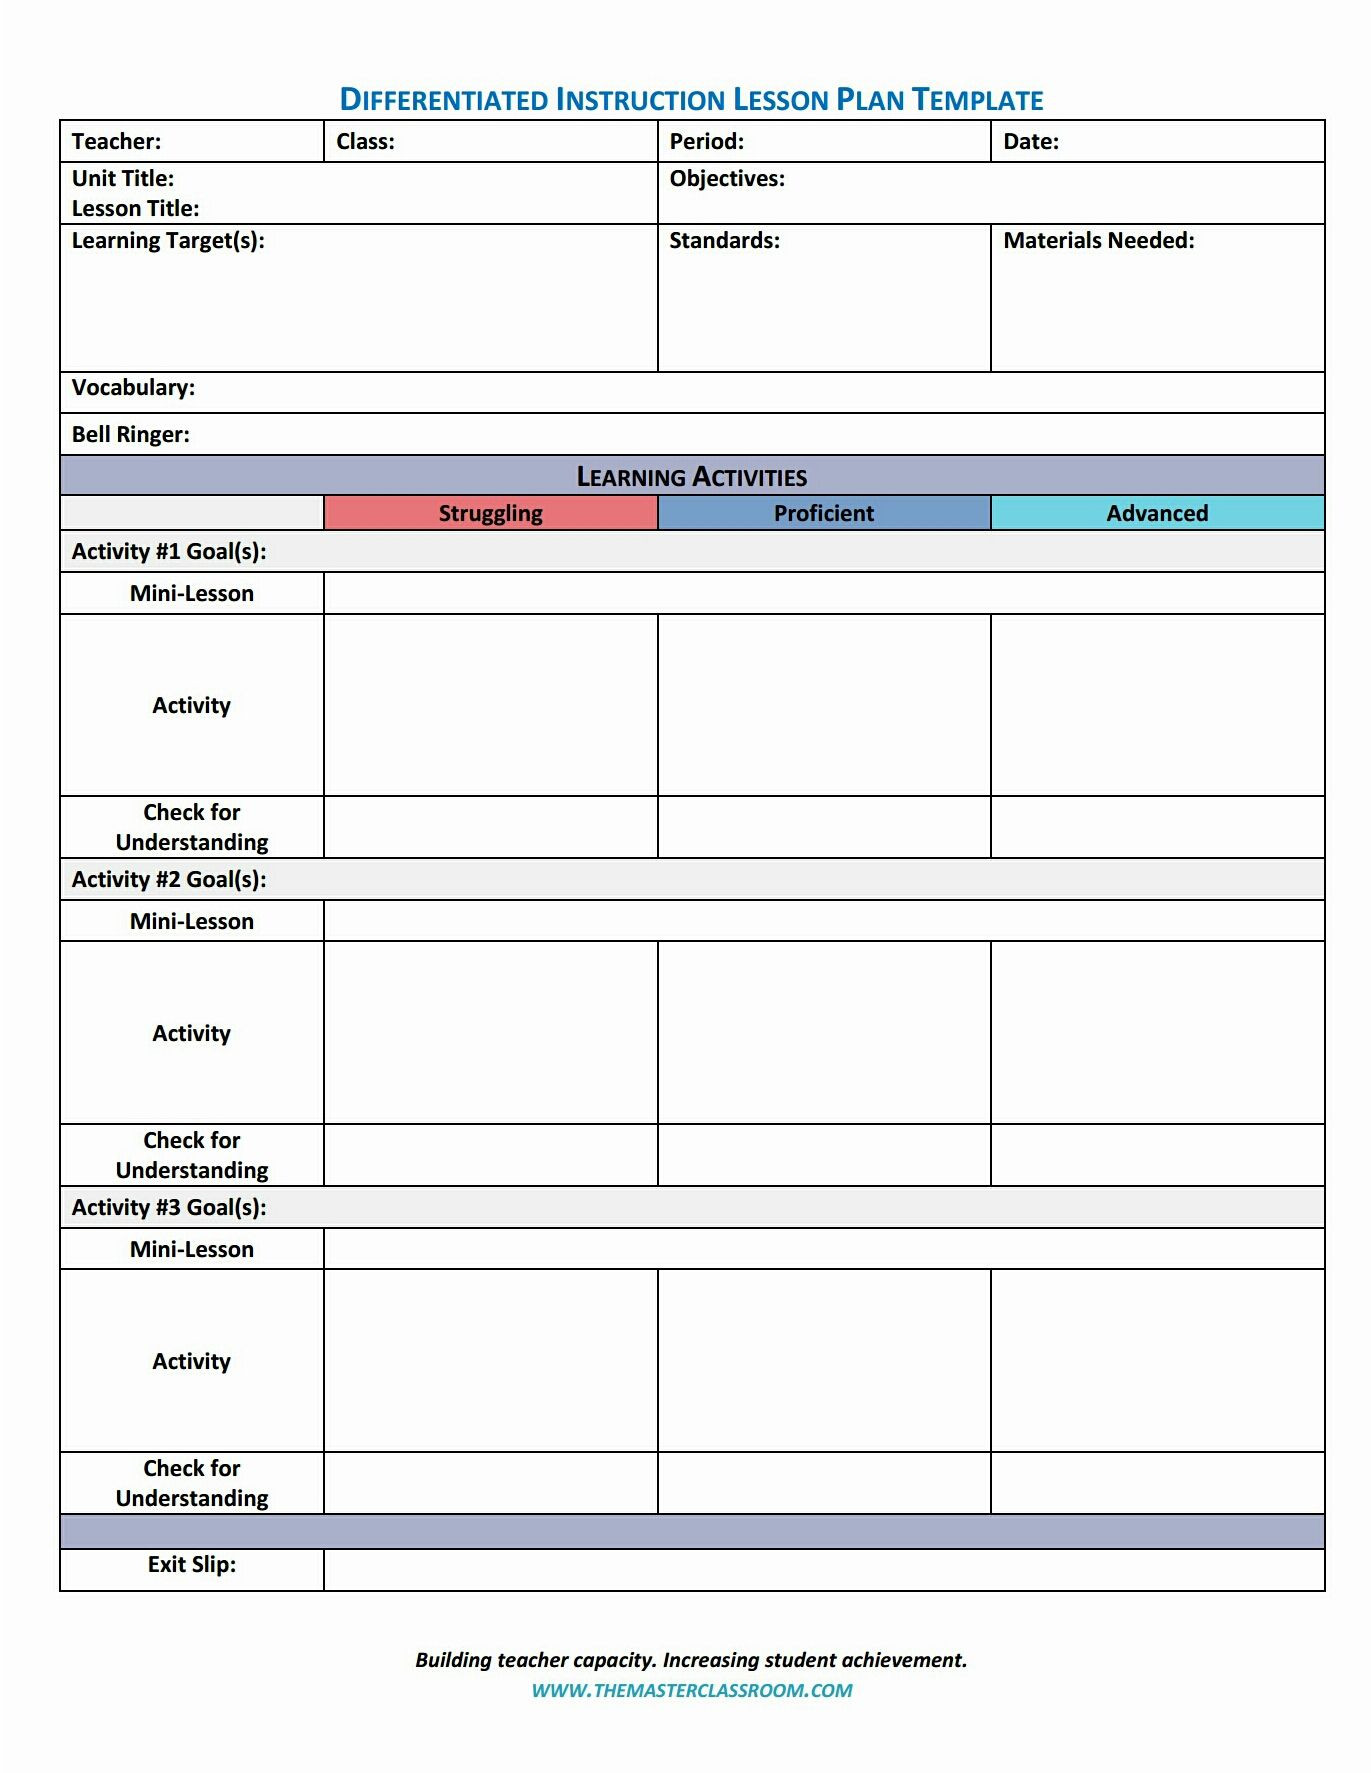 Differentiated Lesson Plan Example Differentiated Instruction Lesson Plan Template Freebie